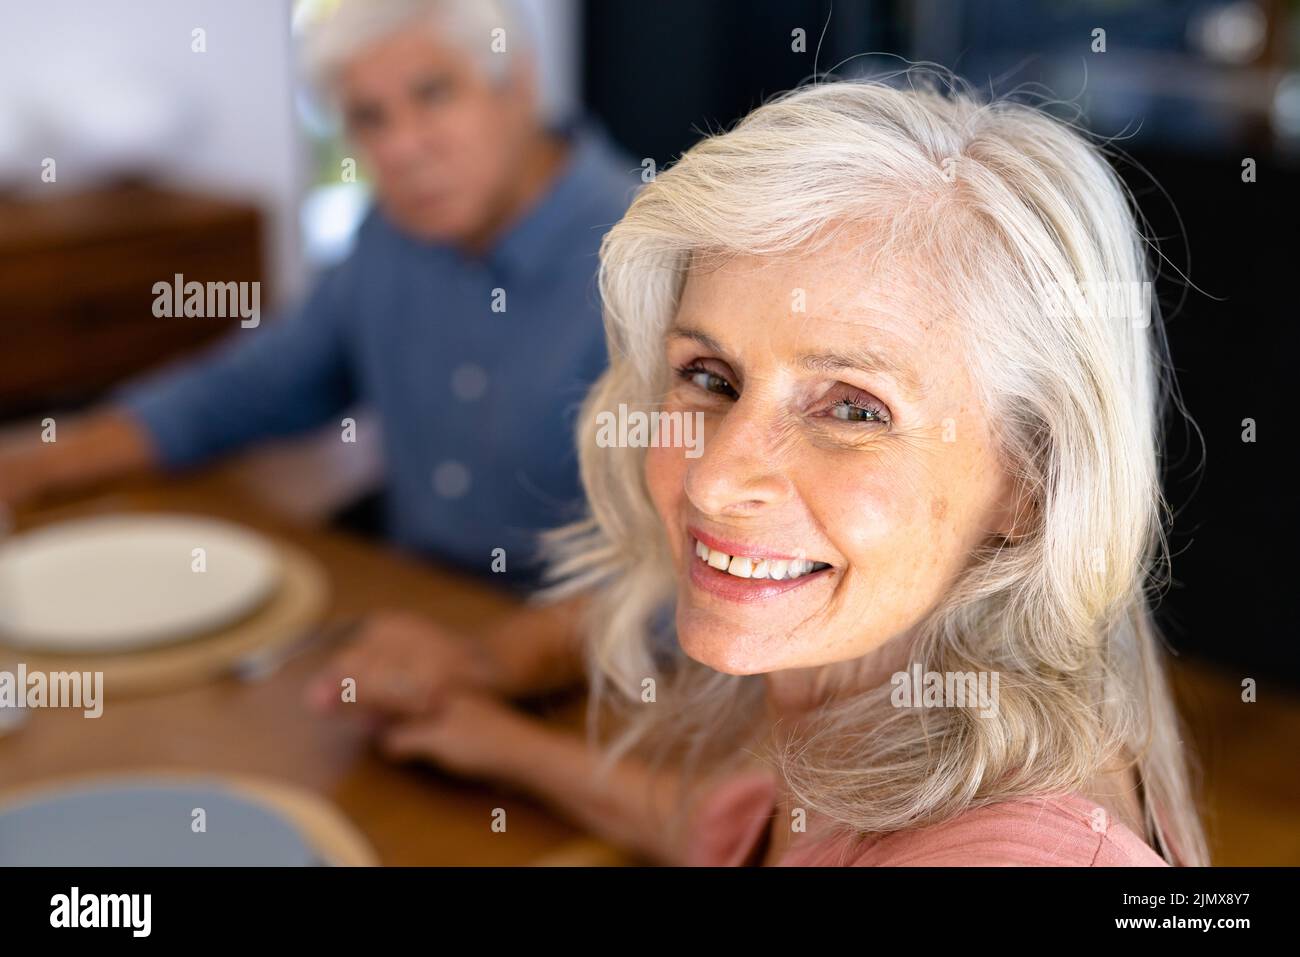 Close-up portrait of smiling caucasian senior woman holding biracial man's hand at dining table Stock Photo